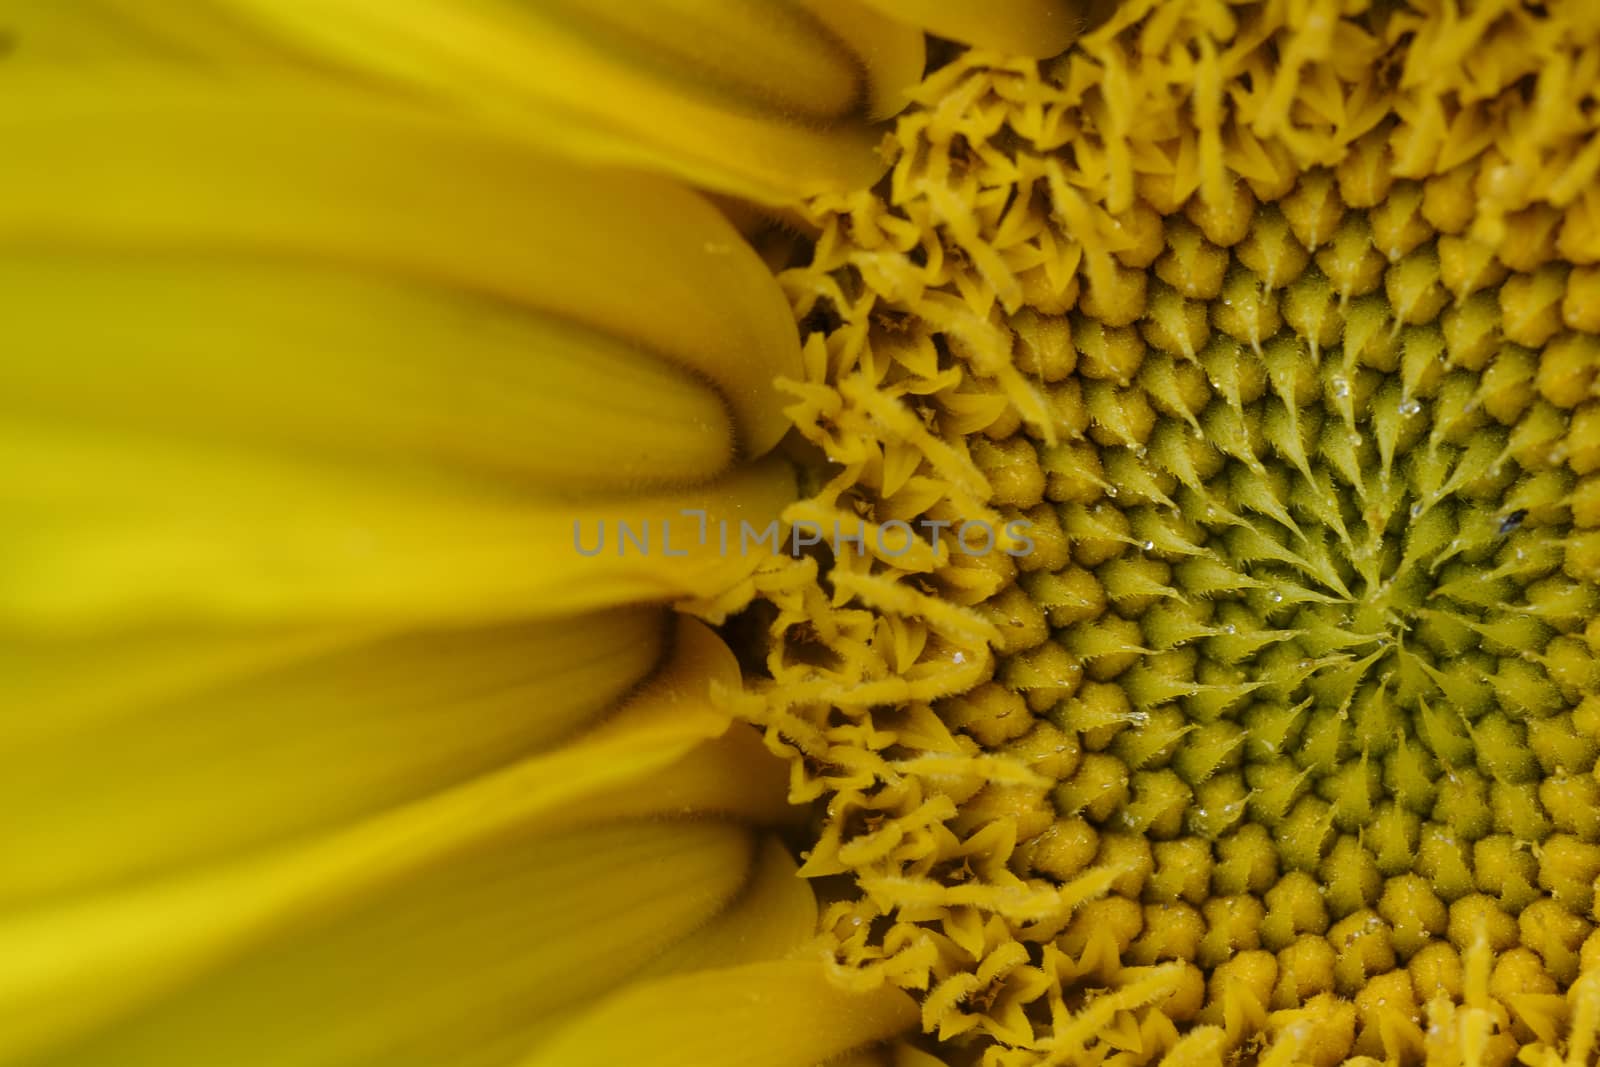 Detailed view of the blossom the sunflower.